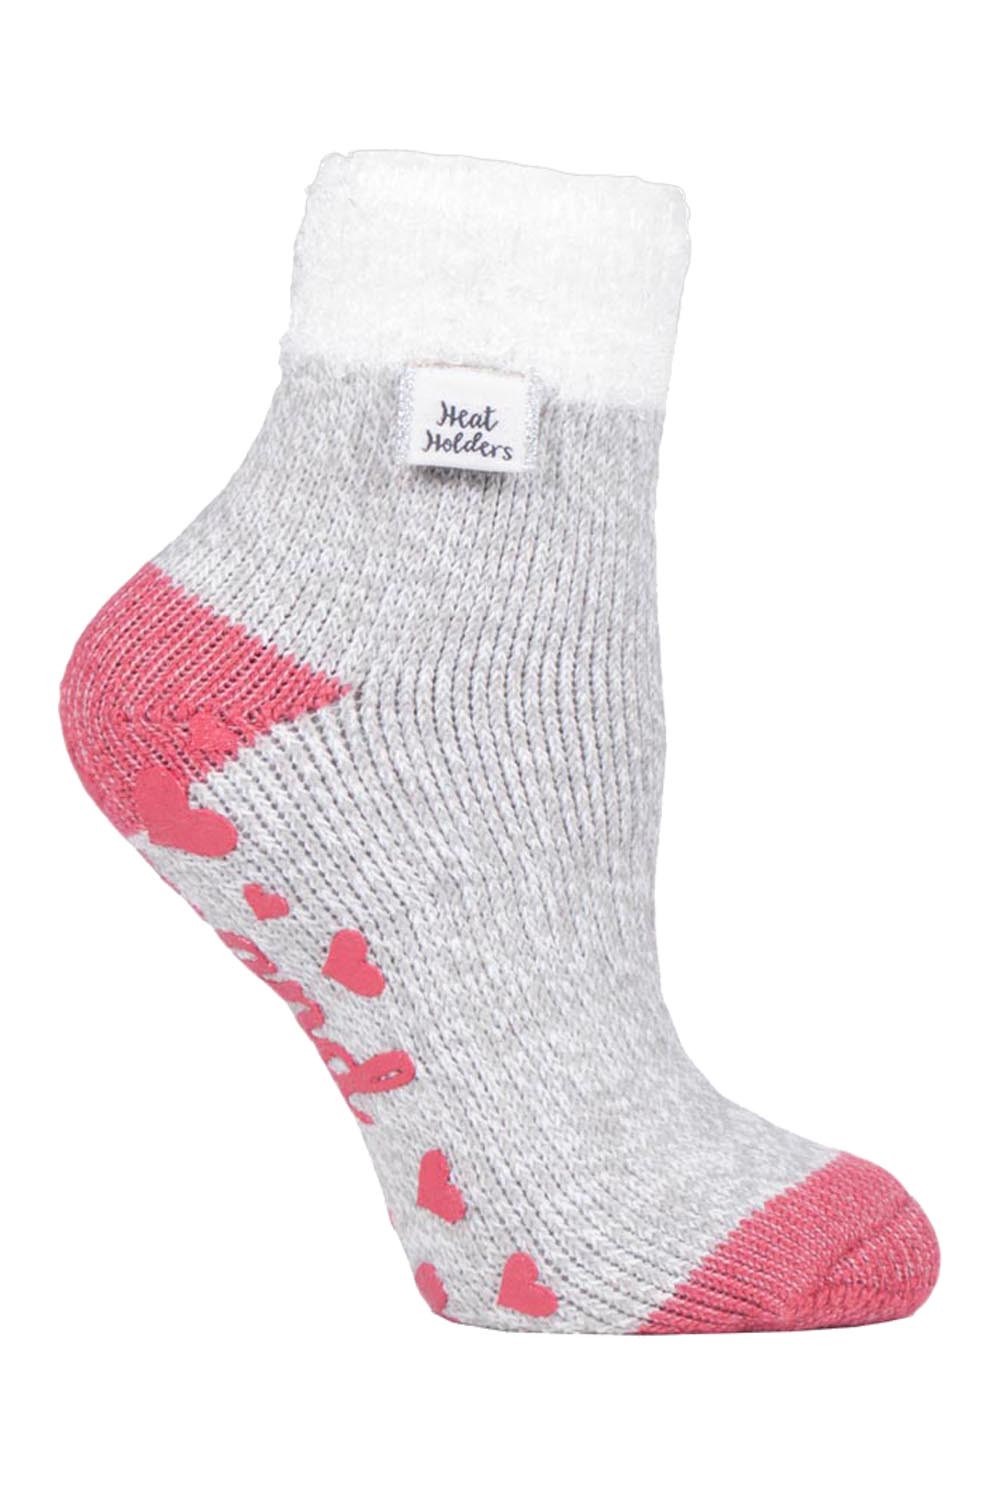 Womens Thermal Bed Socks With Feather Top -